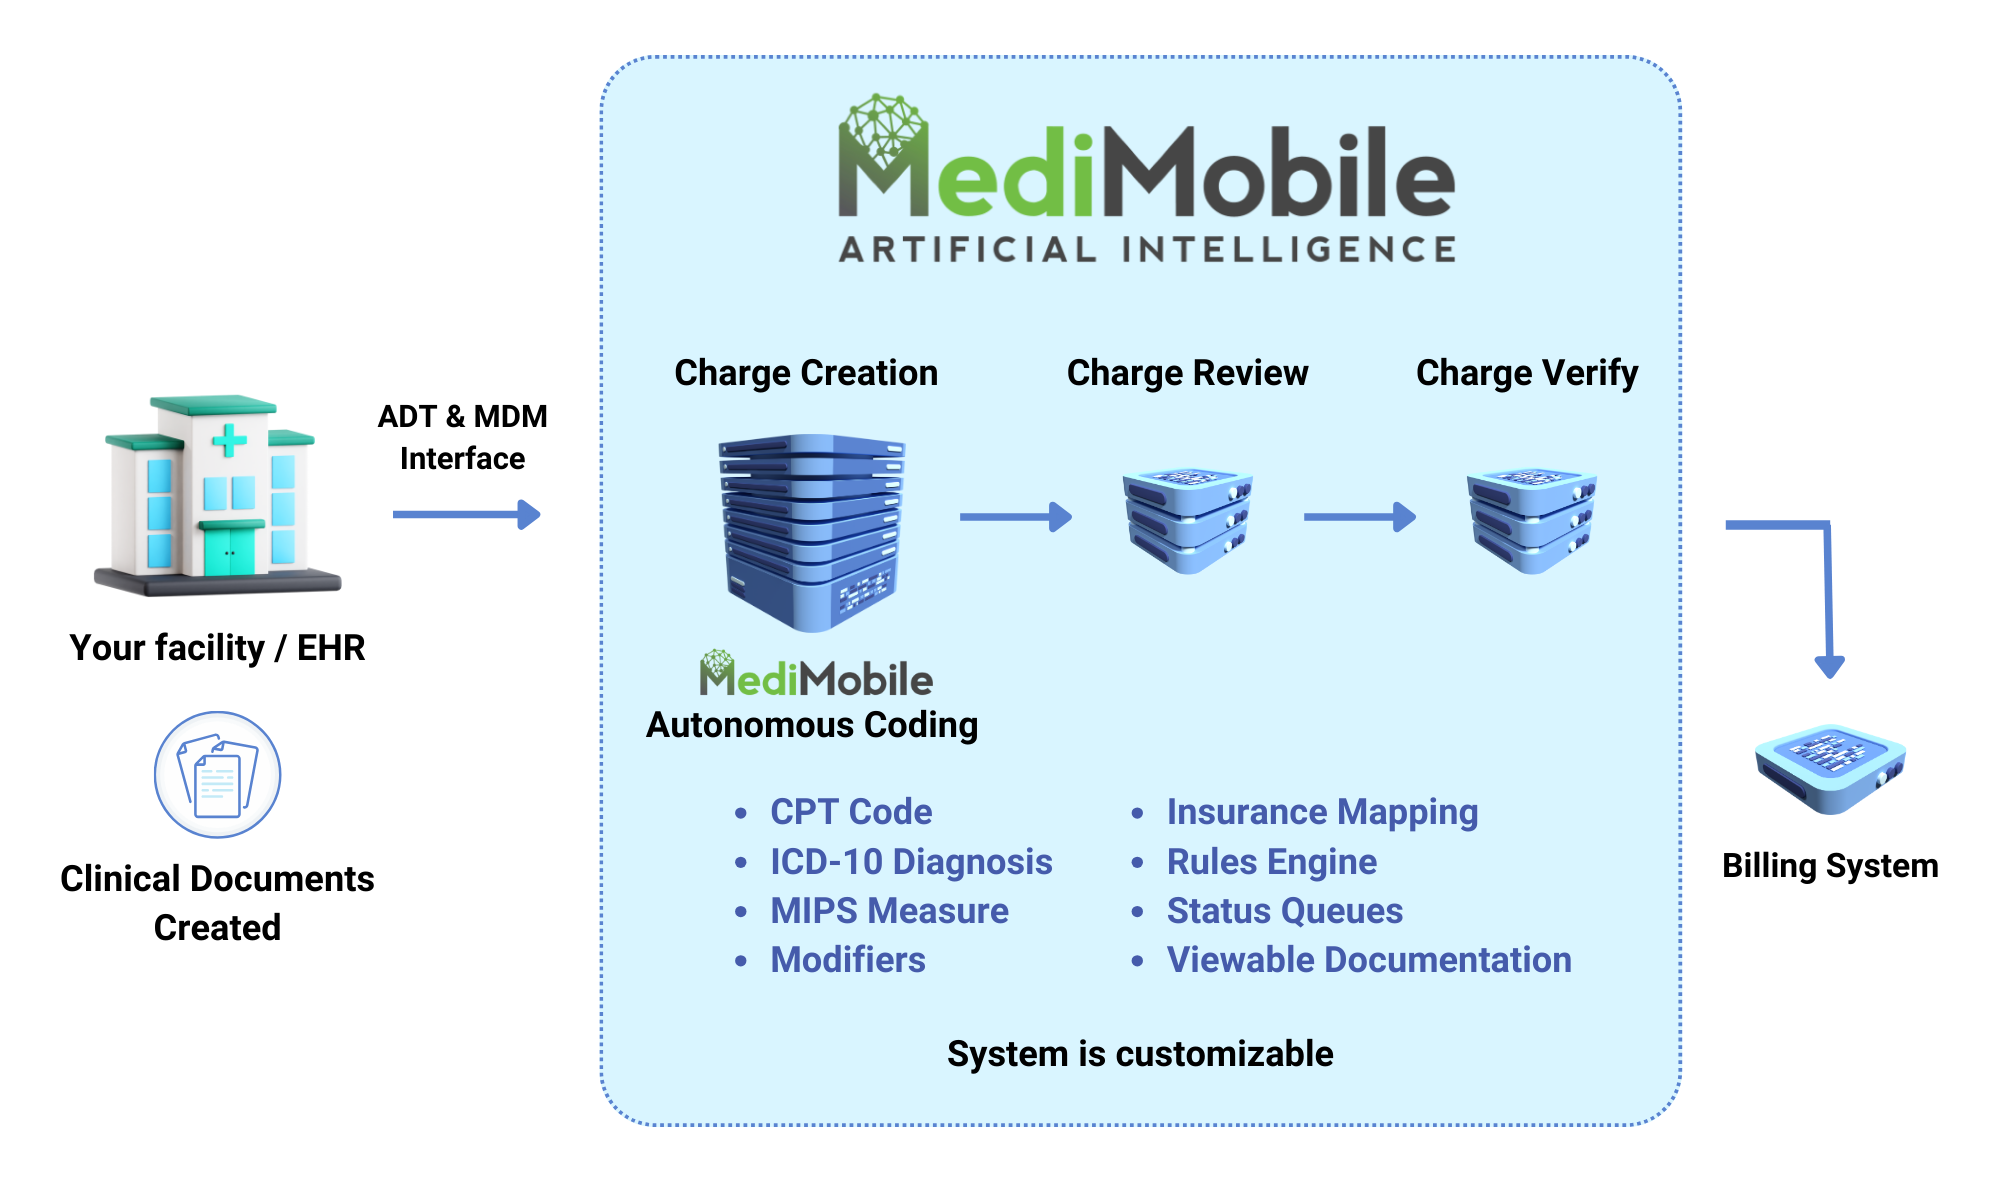 MediMobile Charge Review Depiction